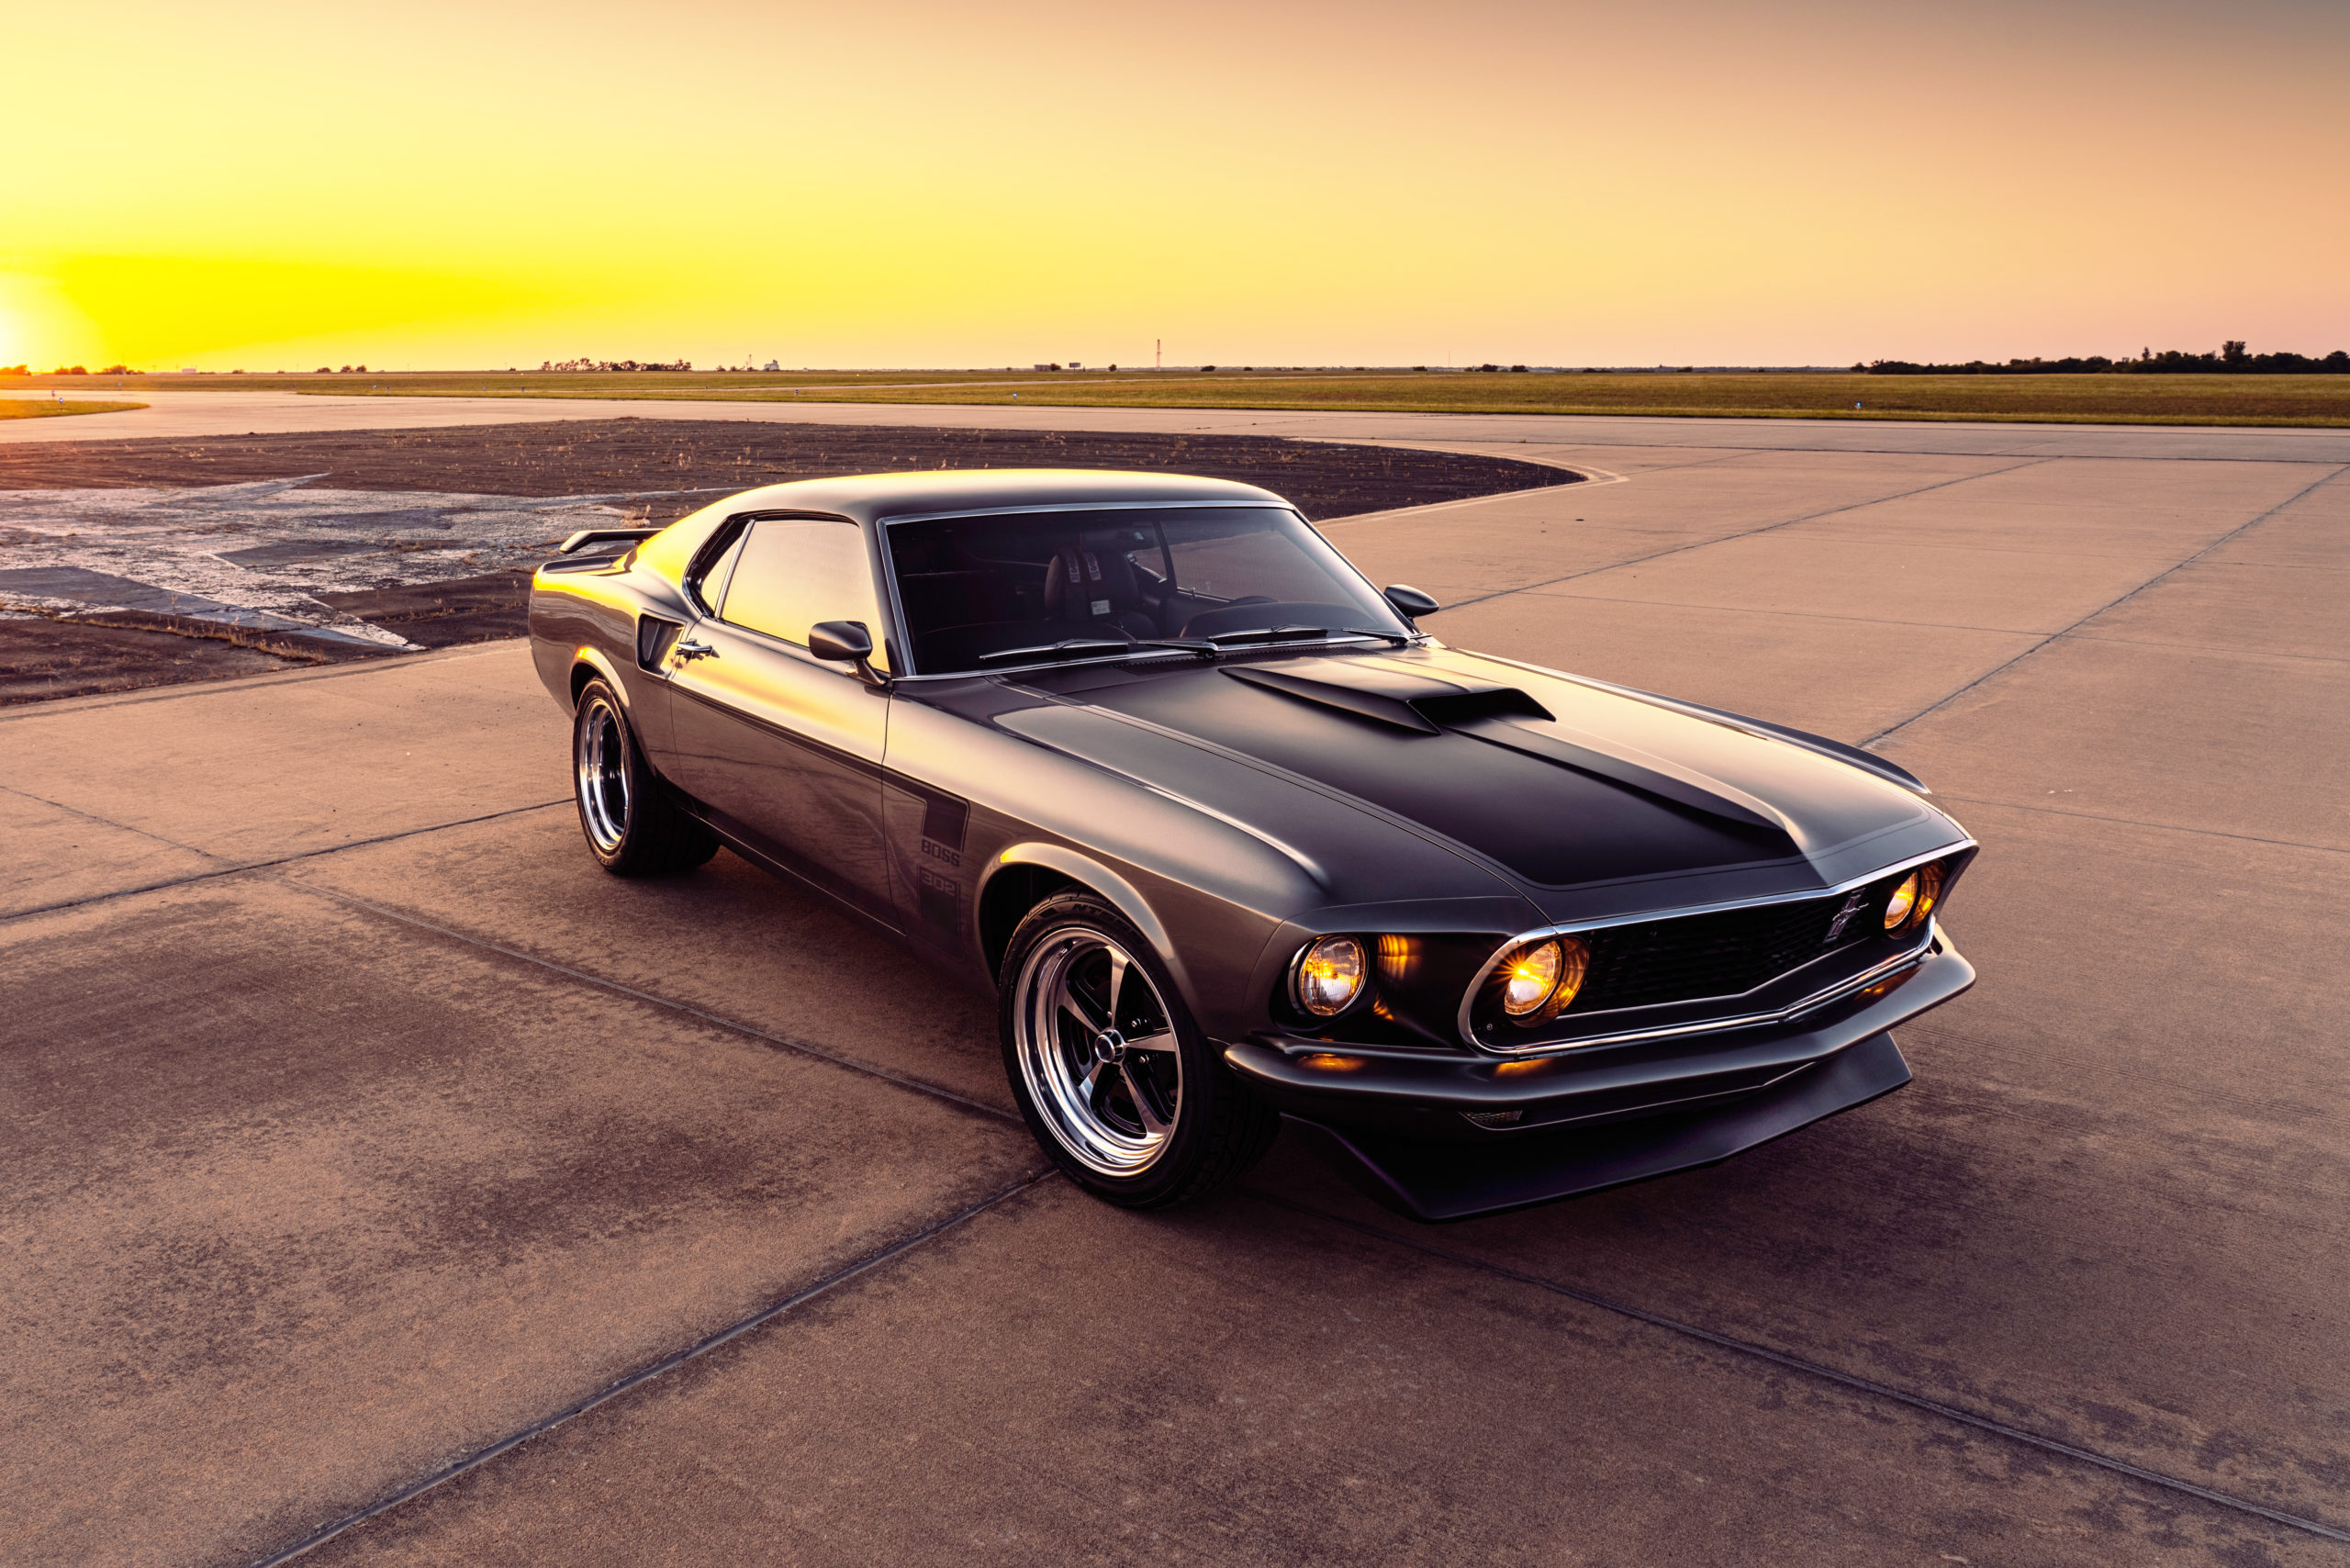 Classic Recreations Adds Mustang Boss 302 to Lineup | THE SHOP